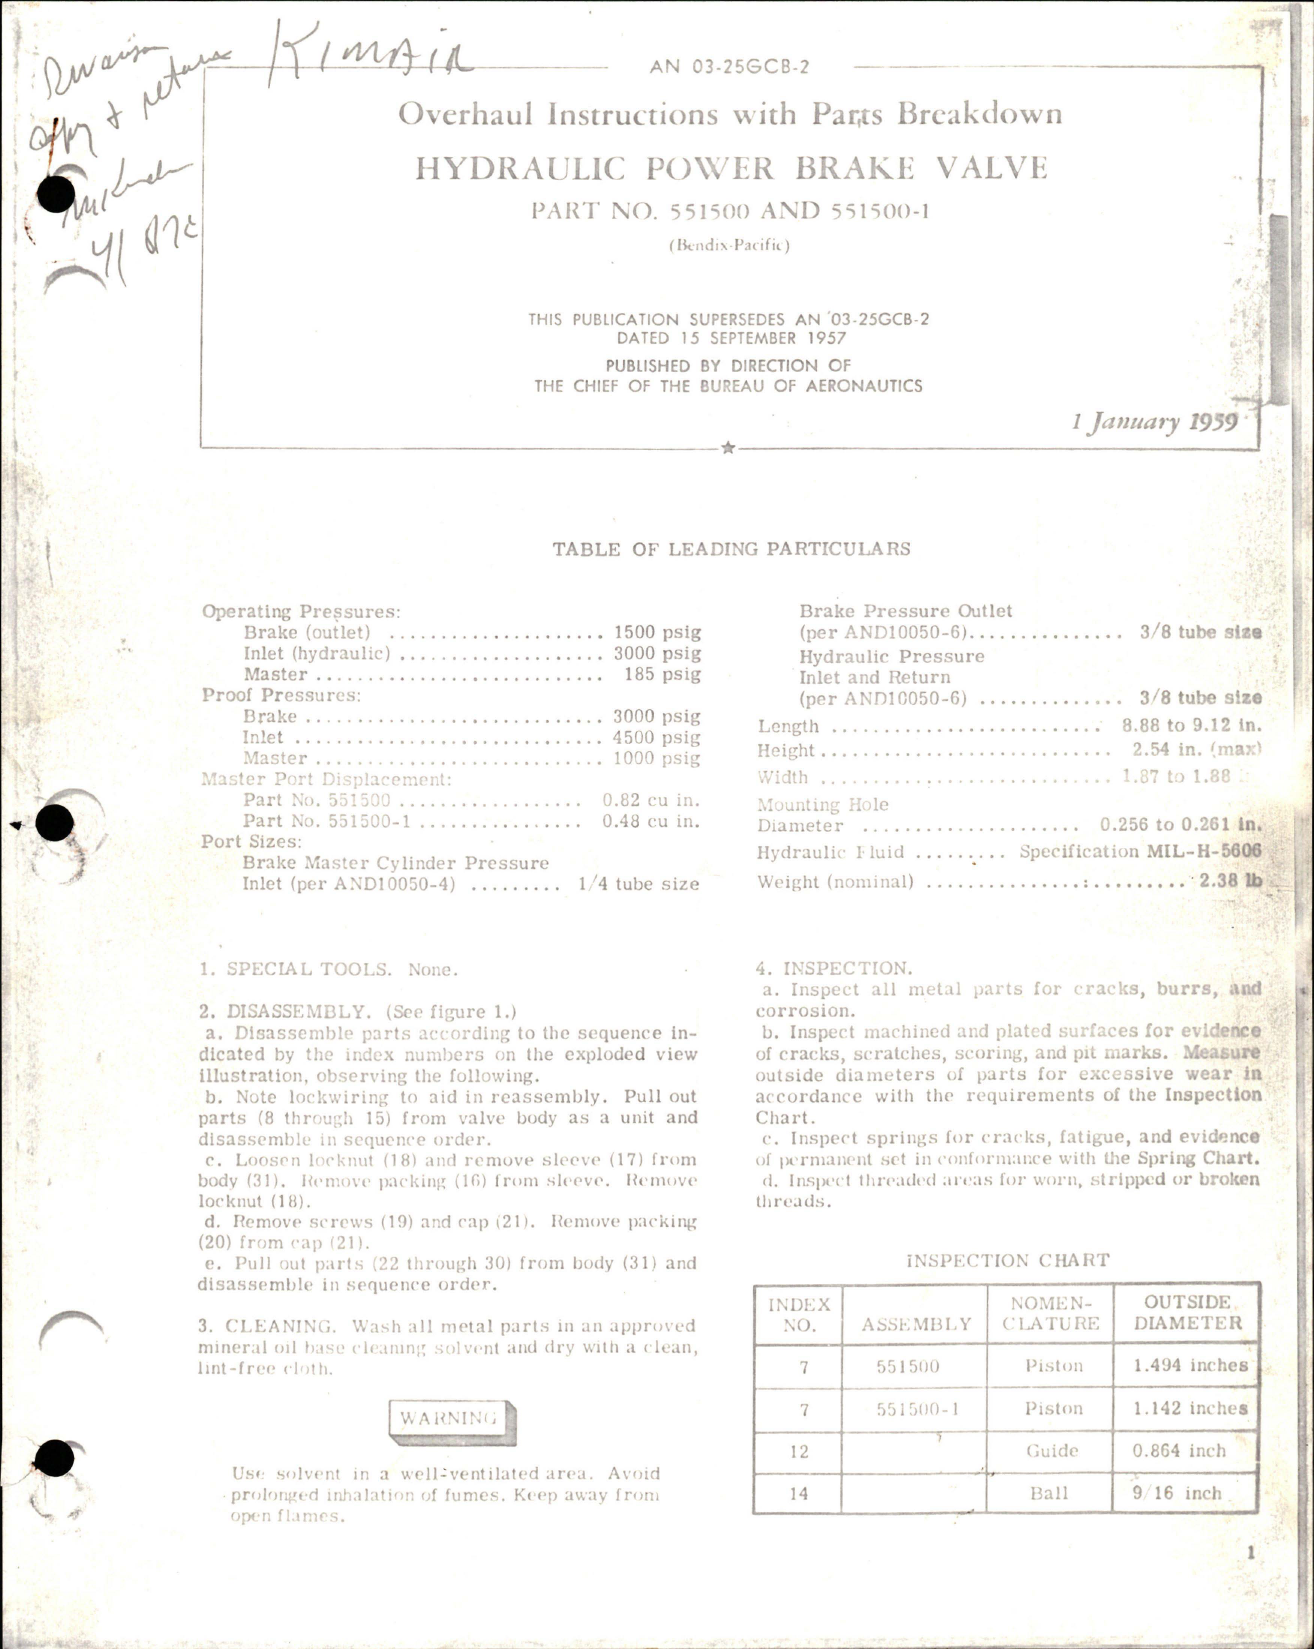 Sample page 1 from AirCorps Library document: Overhaul Instructions with Parts Breakdown for Hydraulic Power Brake Valve - Part 551500 and 551500-1